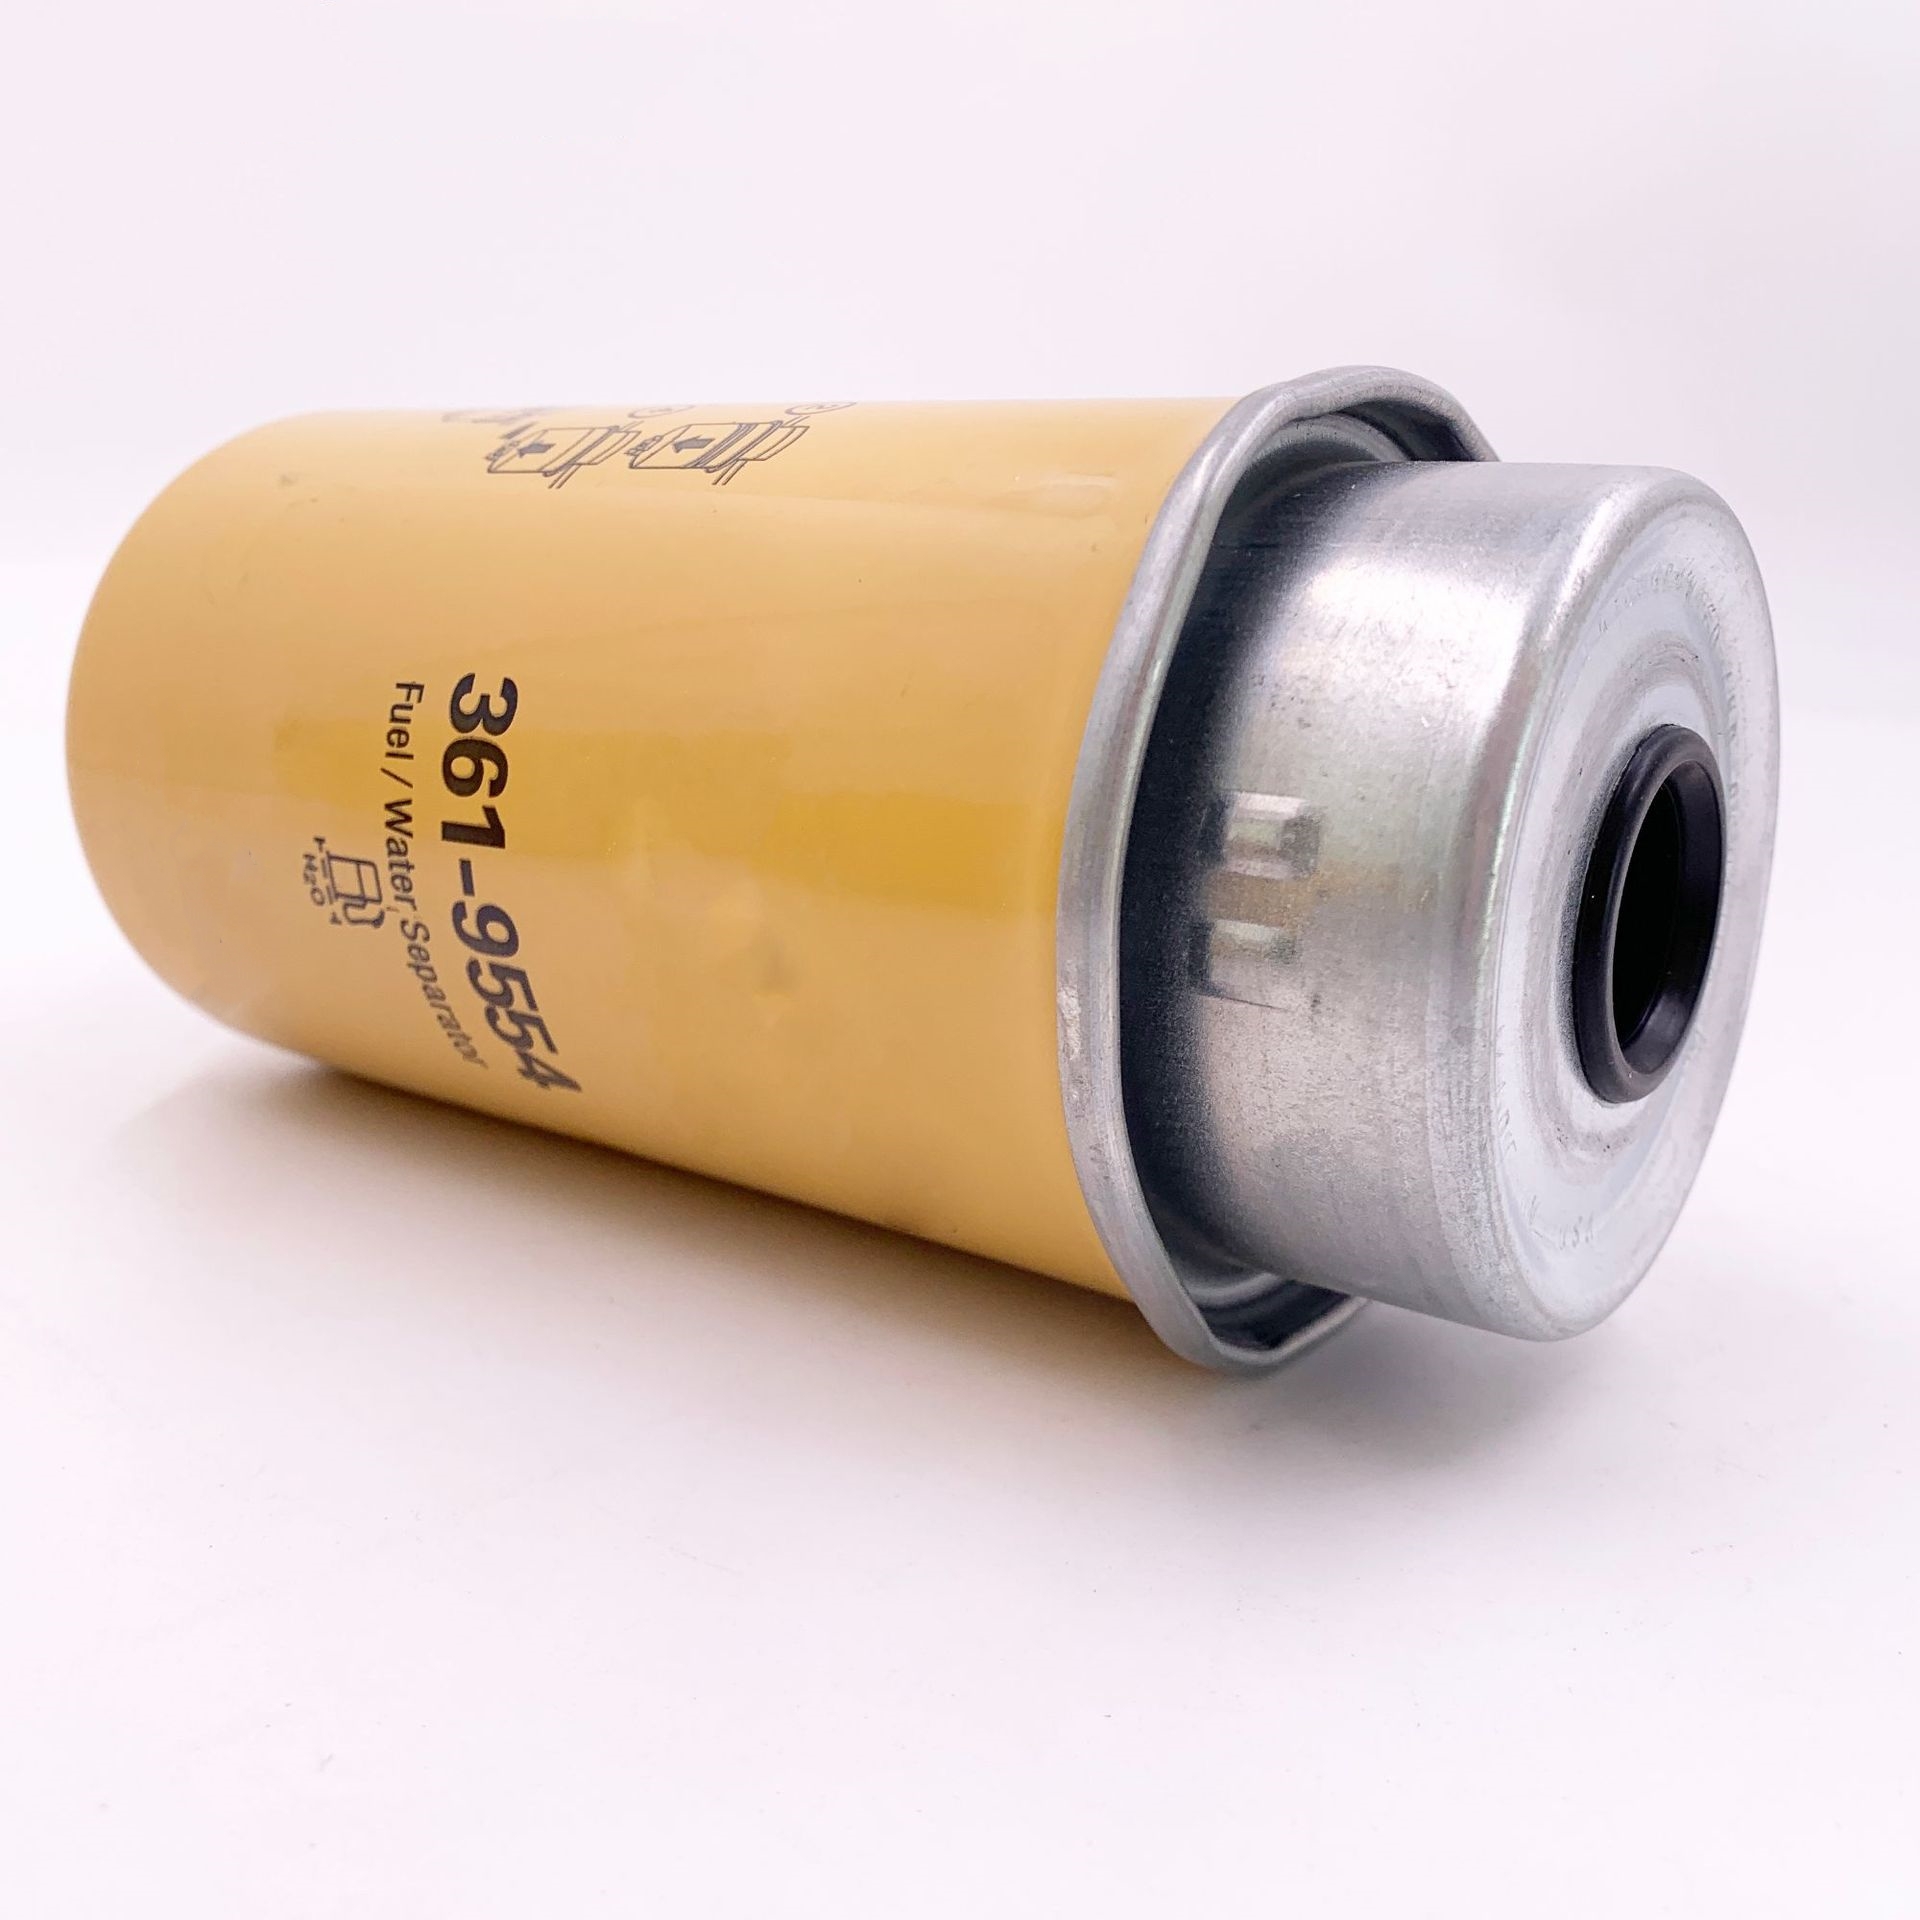 Replace CATERPILLAR Industrial Machinery Fuel Water Separation Filter Cartridge 361-9554